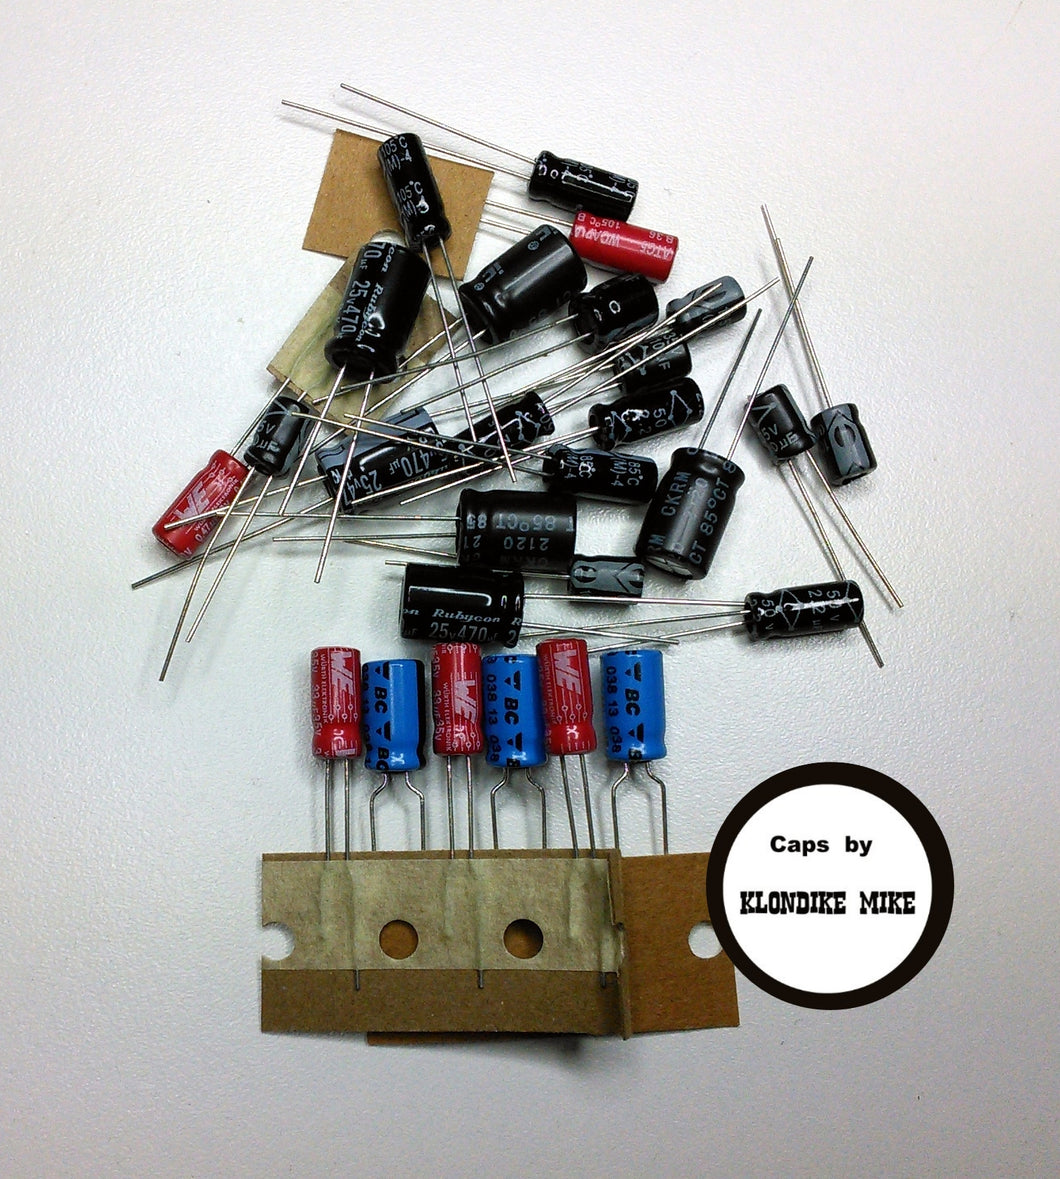 Robyn AM-500D electrolytic capacitor kit